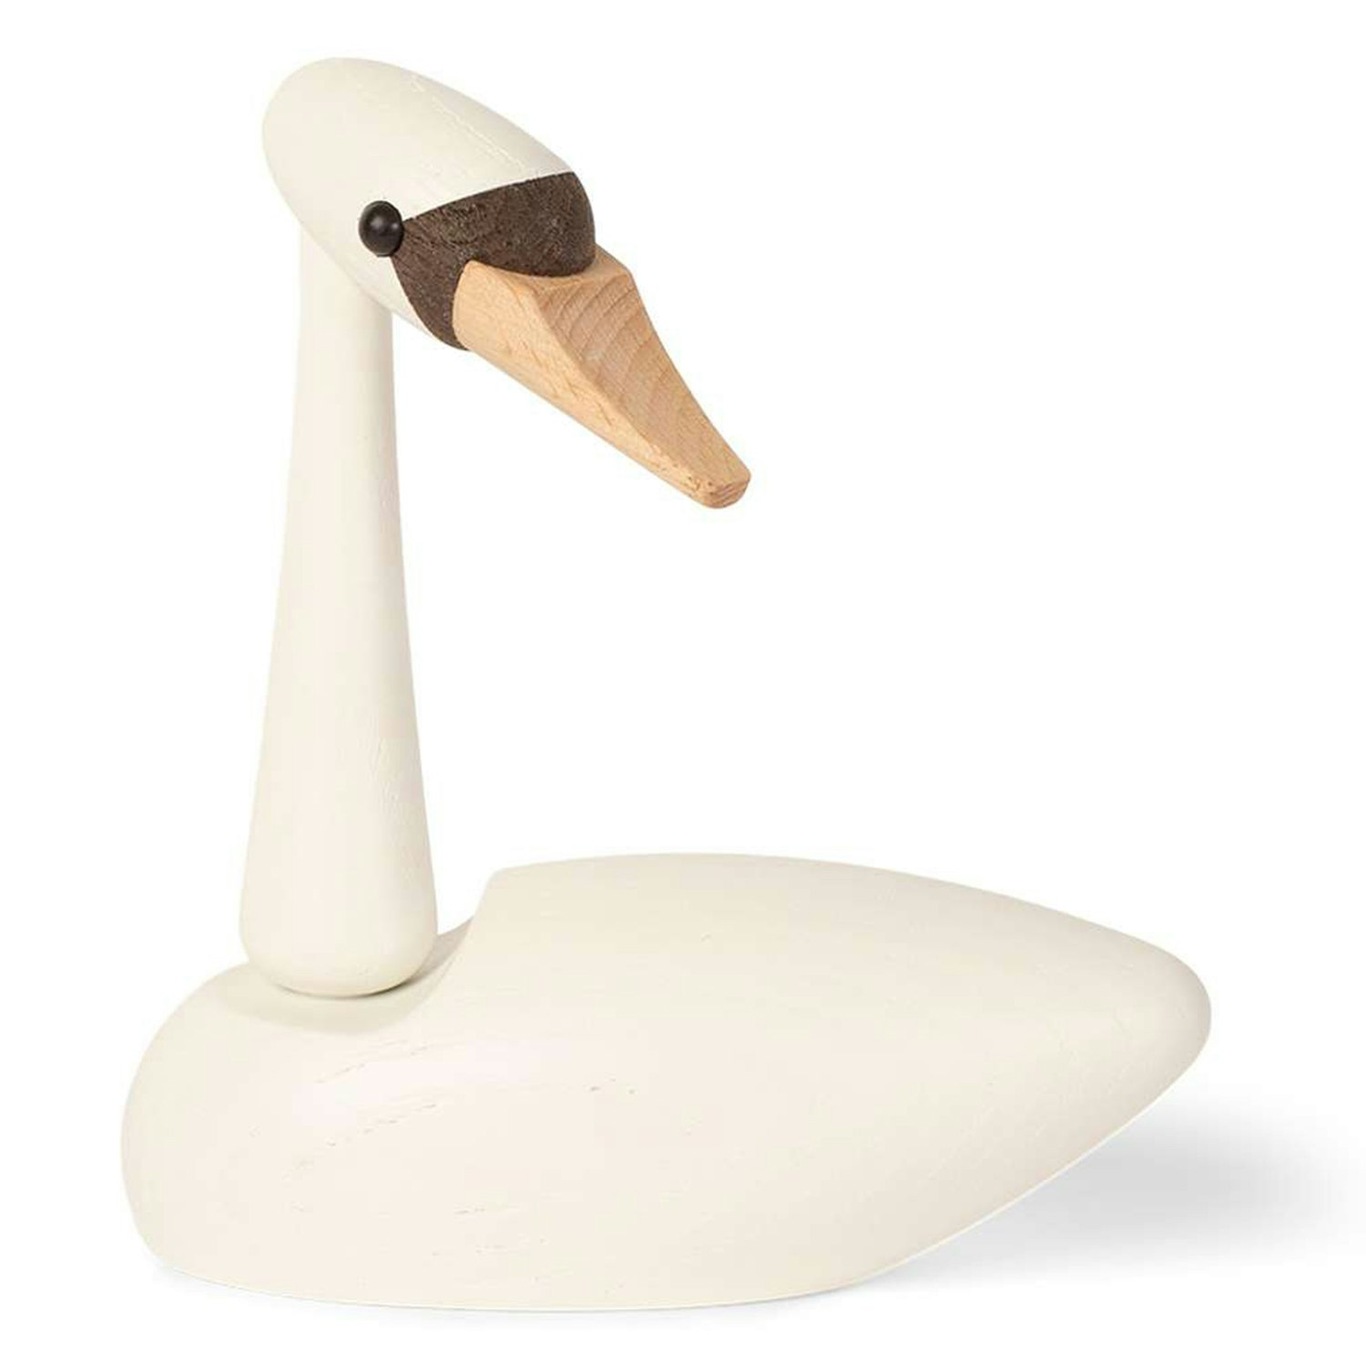 19 Coolest Salt and Pepper Shakers - Design Swan